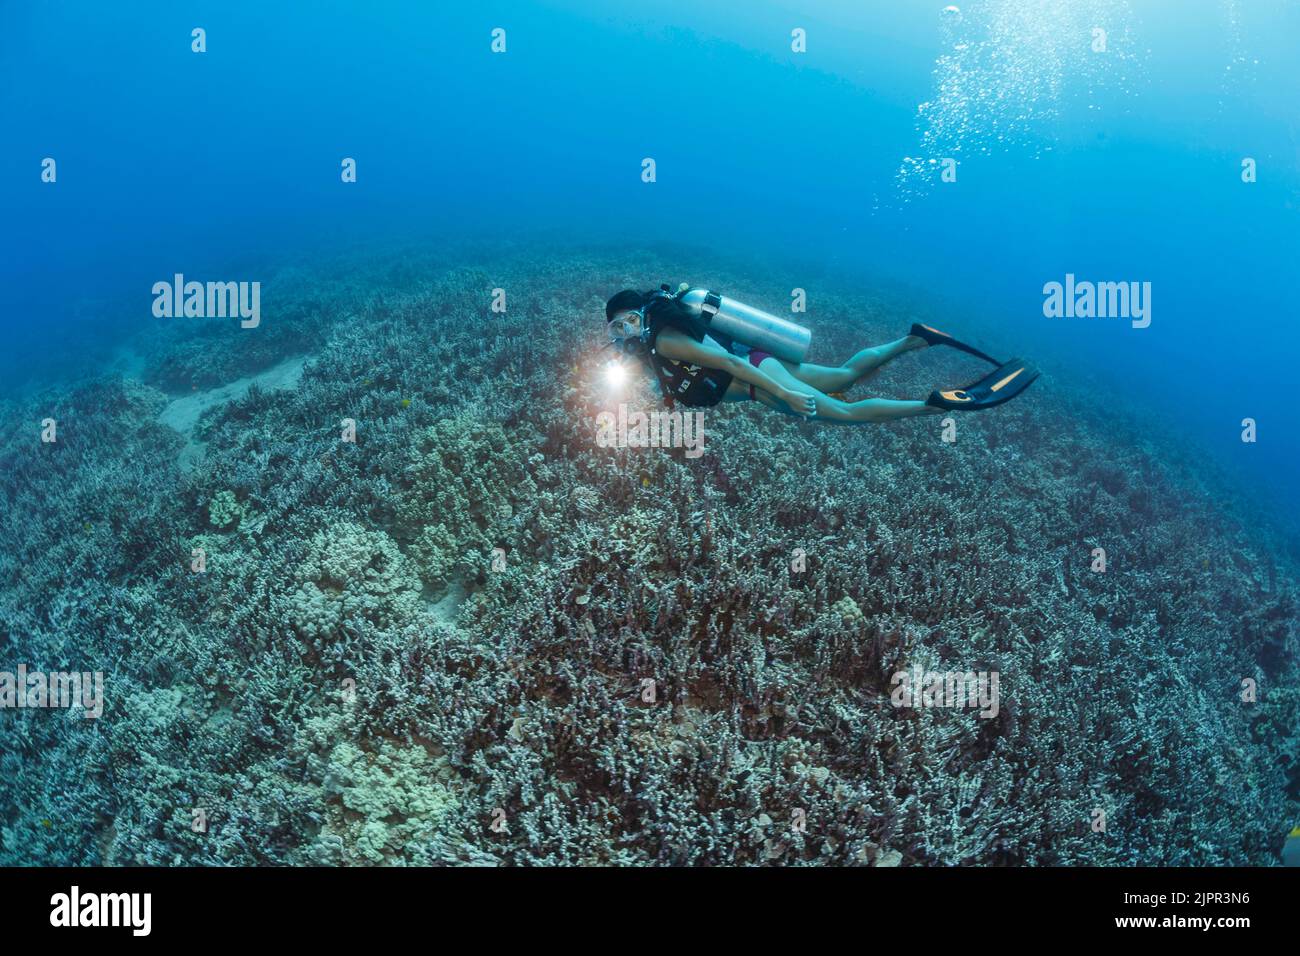 Diver (MR) pictured cruising over a garden of hard coral off the island of Maui, Hawaii. Stock Photo